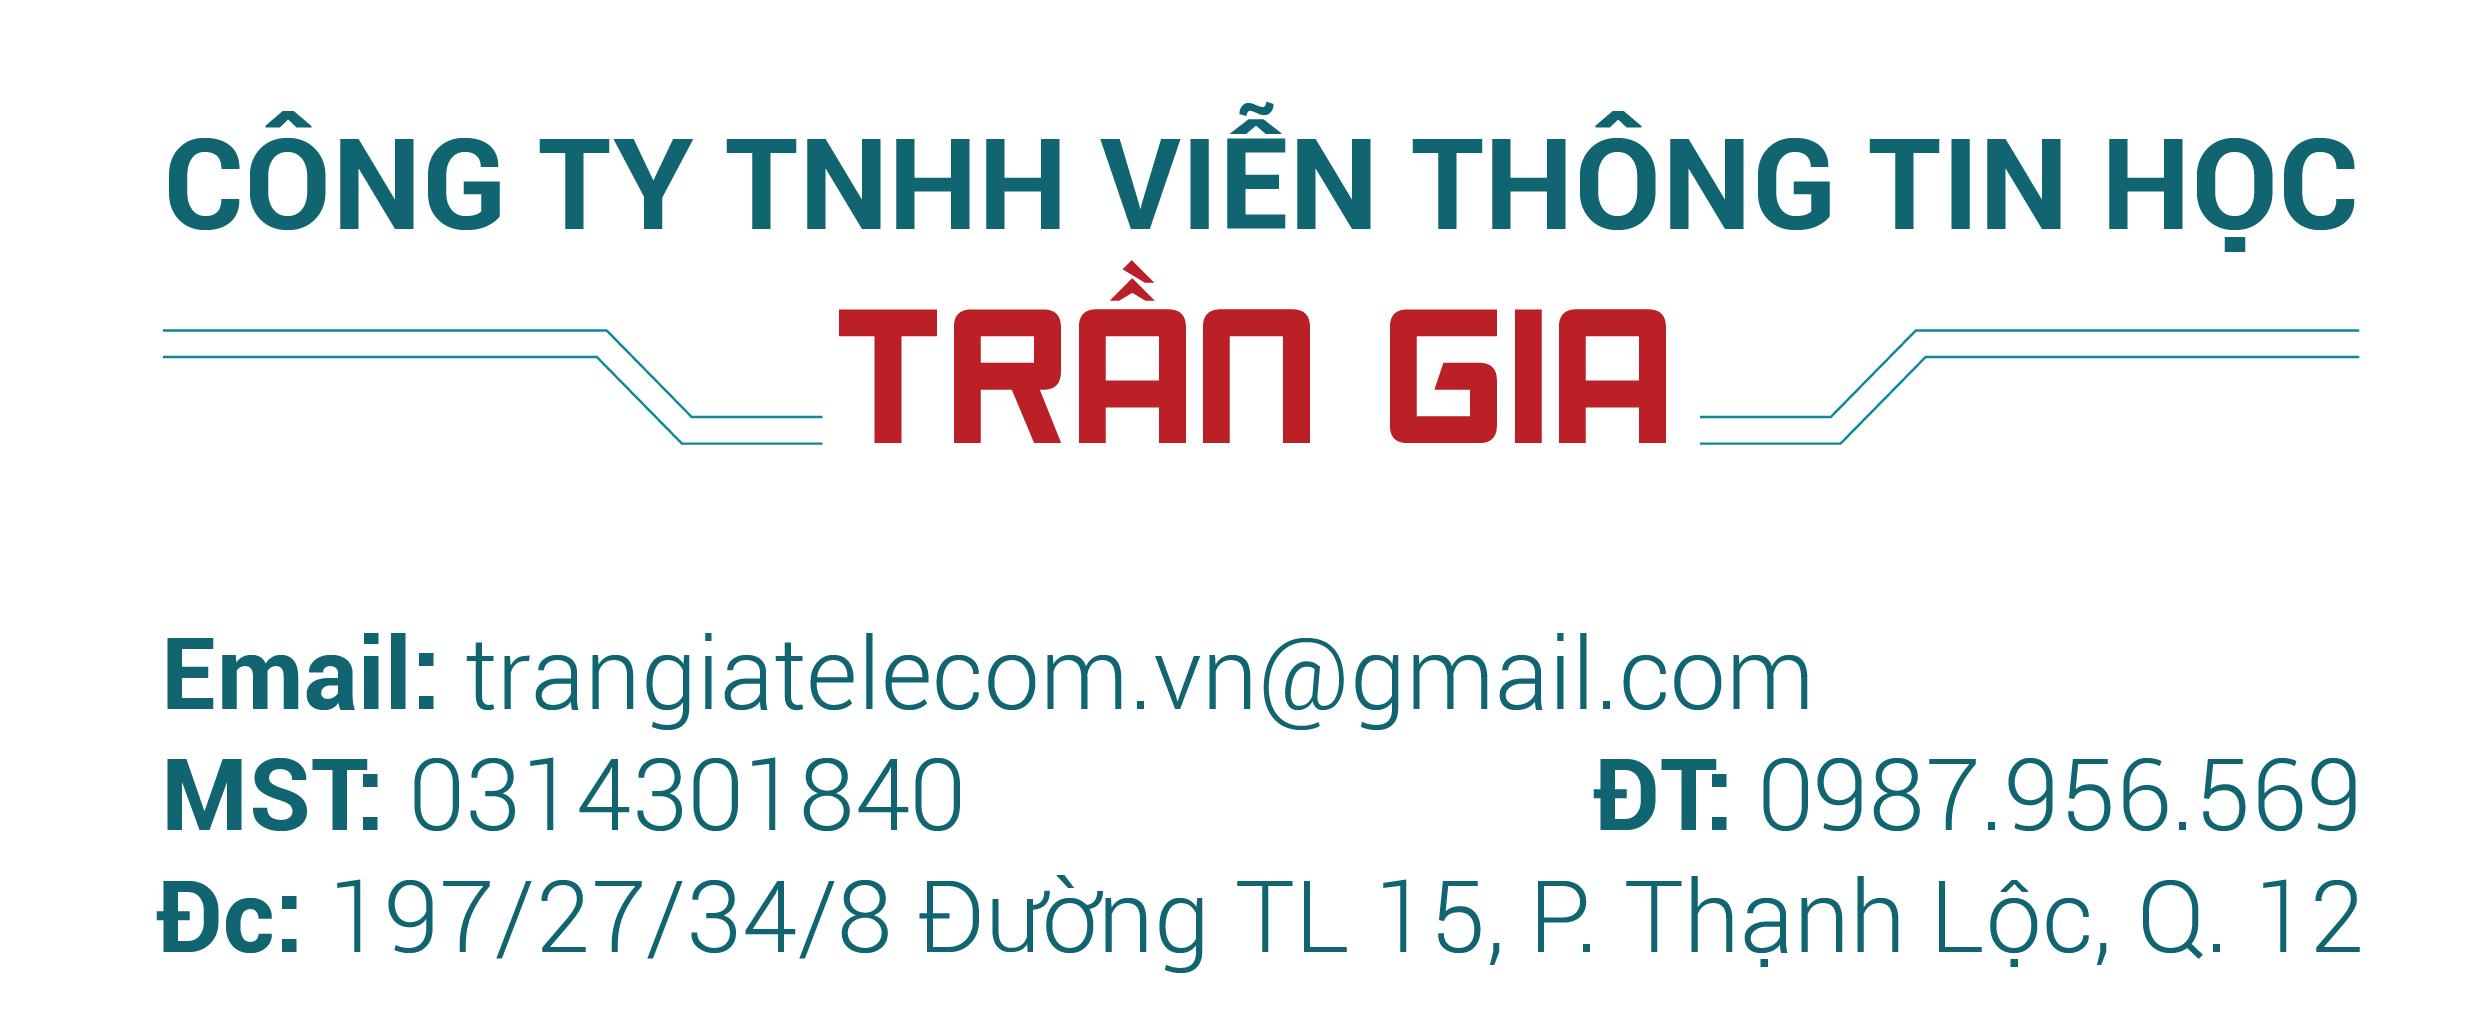 File anh Ten Cty dia chi